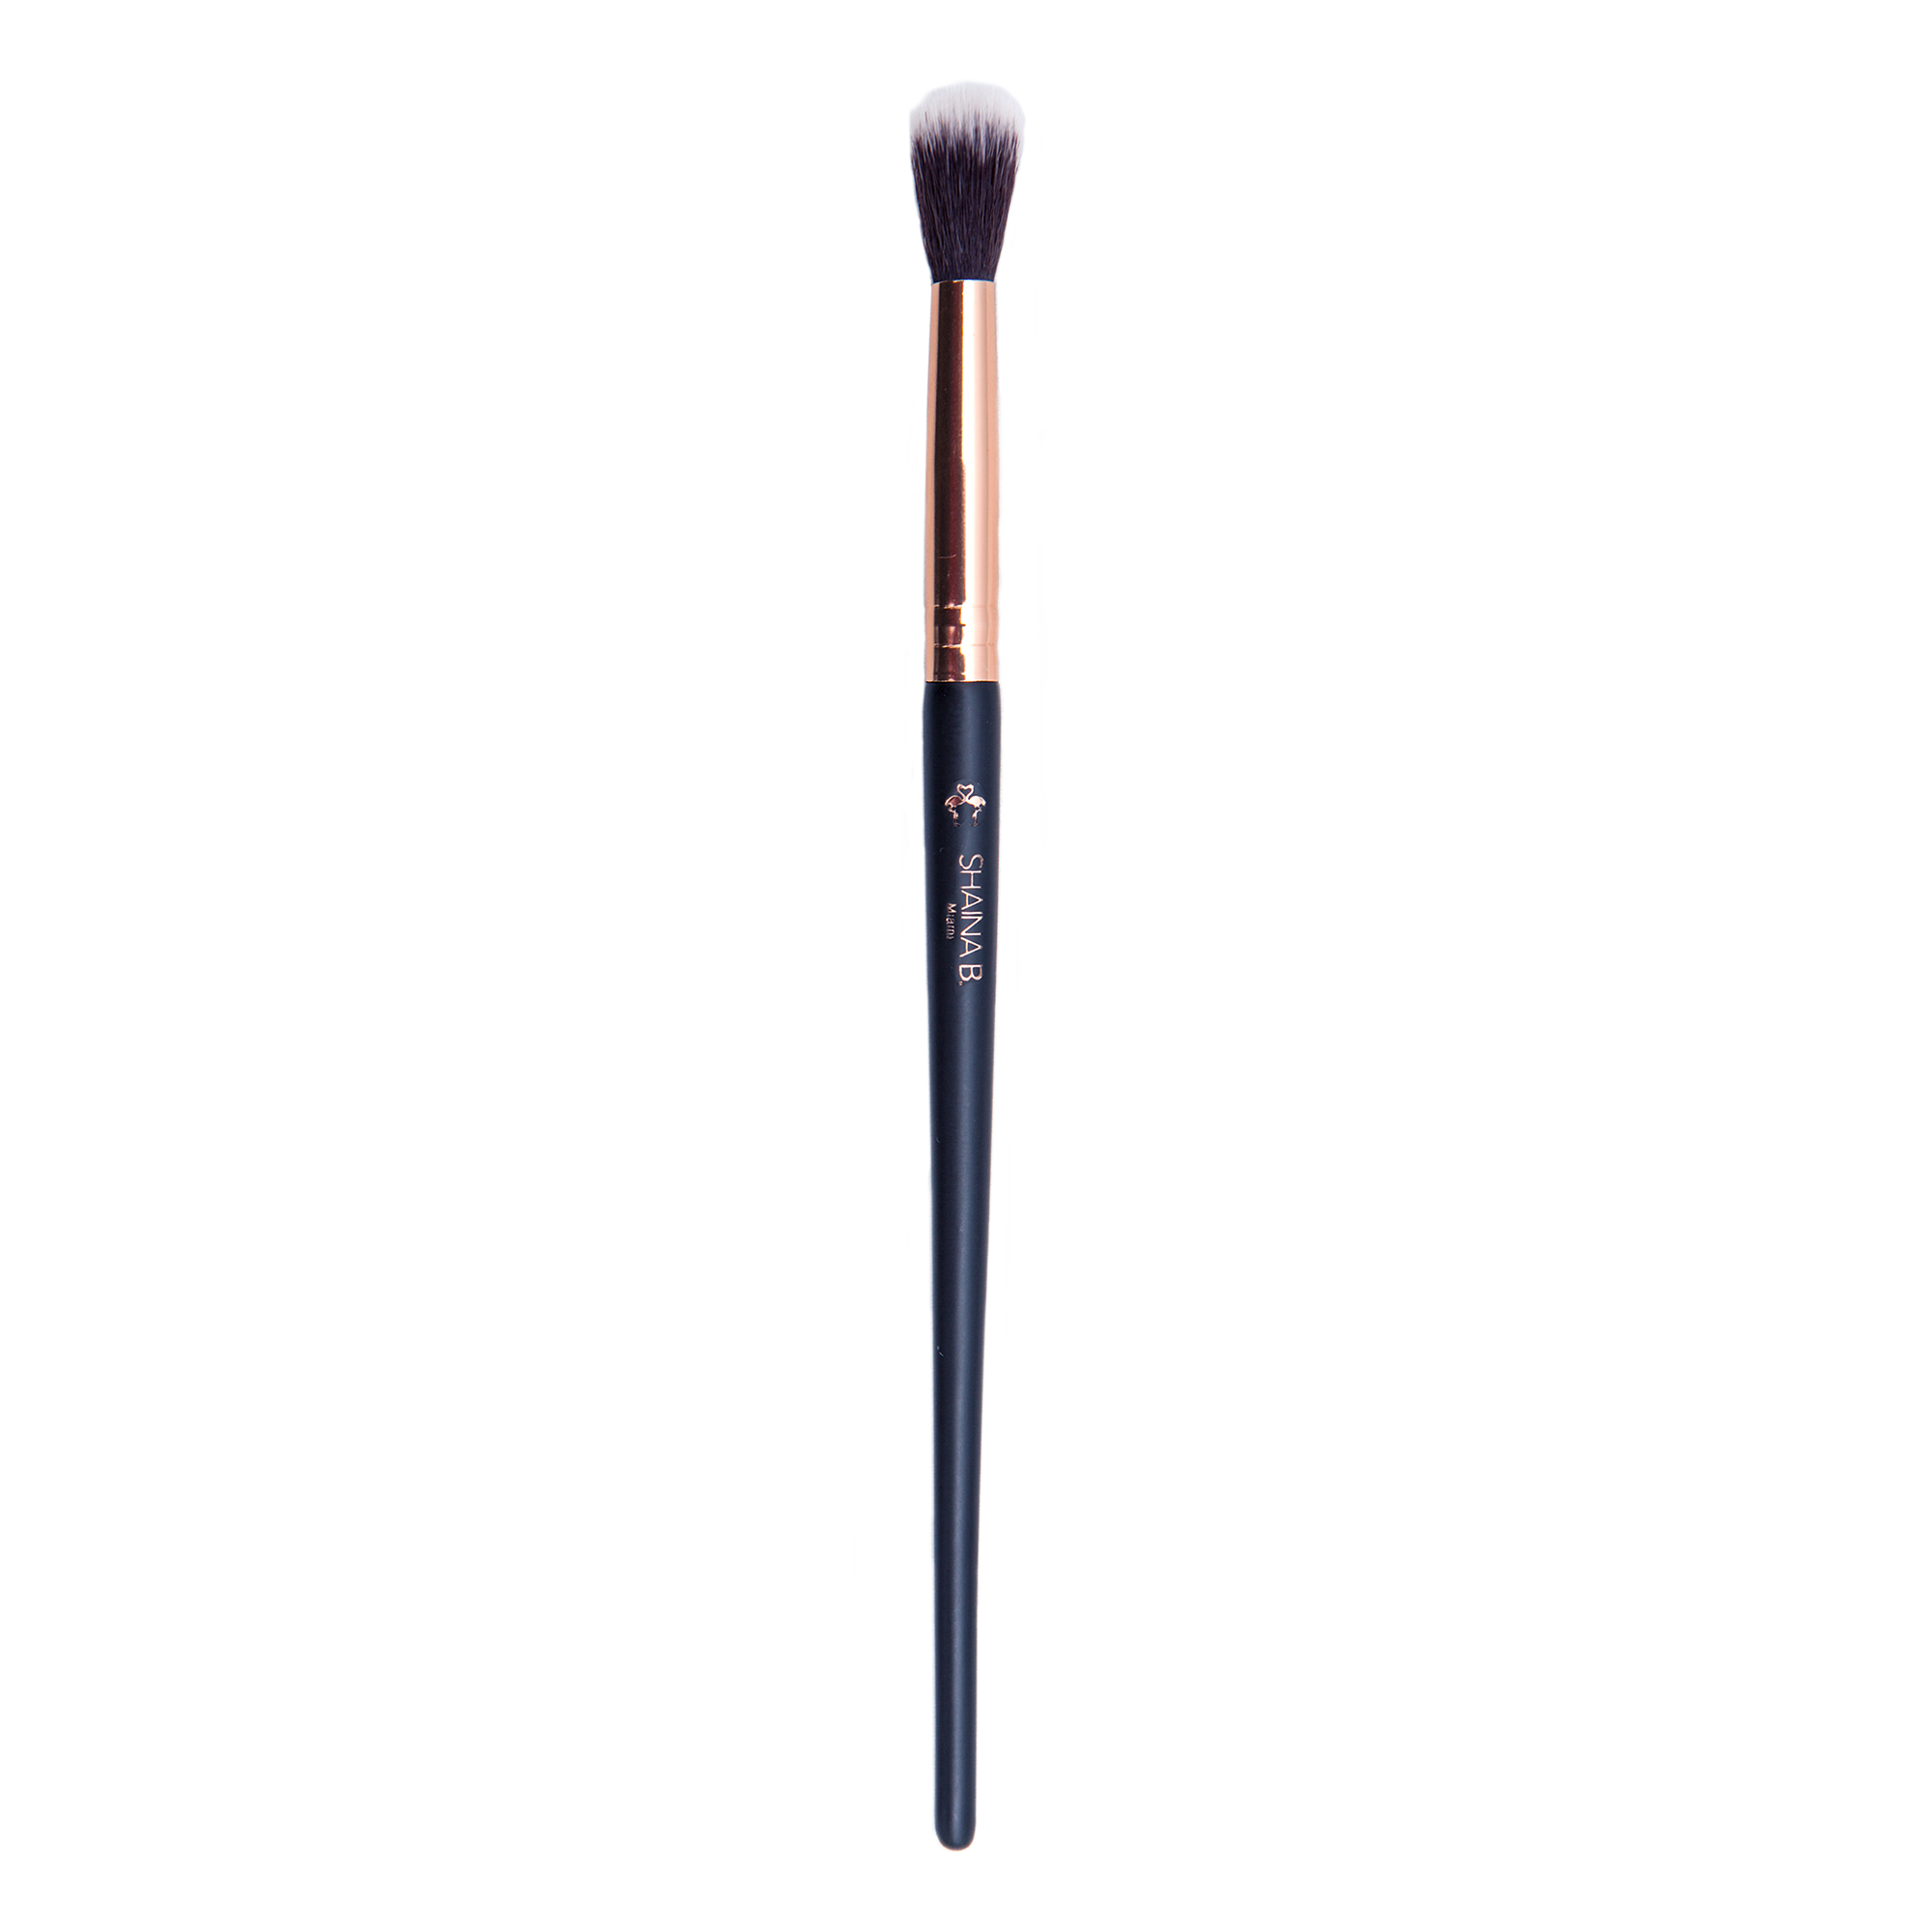 Pro Blending Brush - For Diffusing Colour and Blending Around The Eyes.  Dome Tipped, Full and Super Fluffy beauty buy necessity for makeup artists  and makeup lovers looking to perfect eyelooks. The